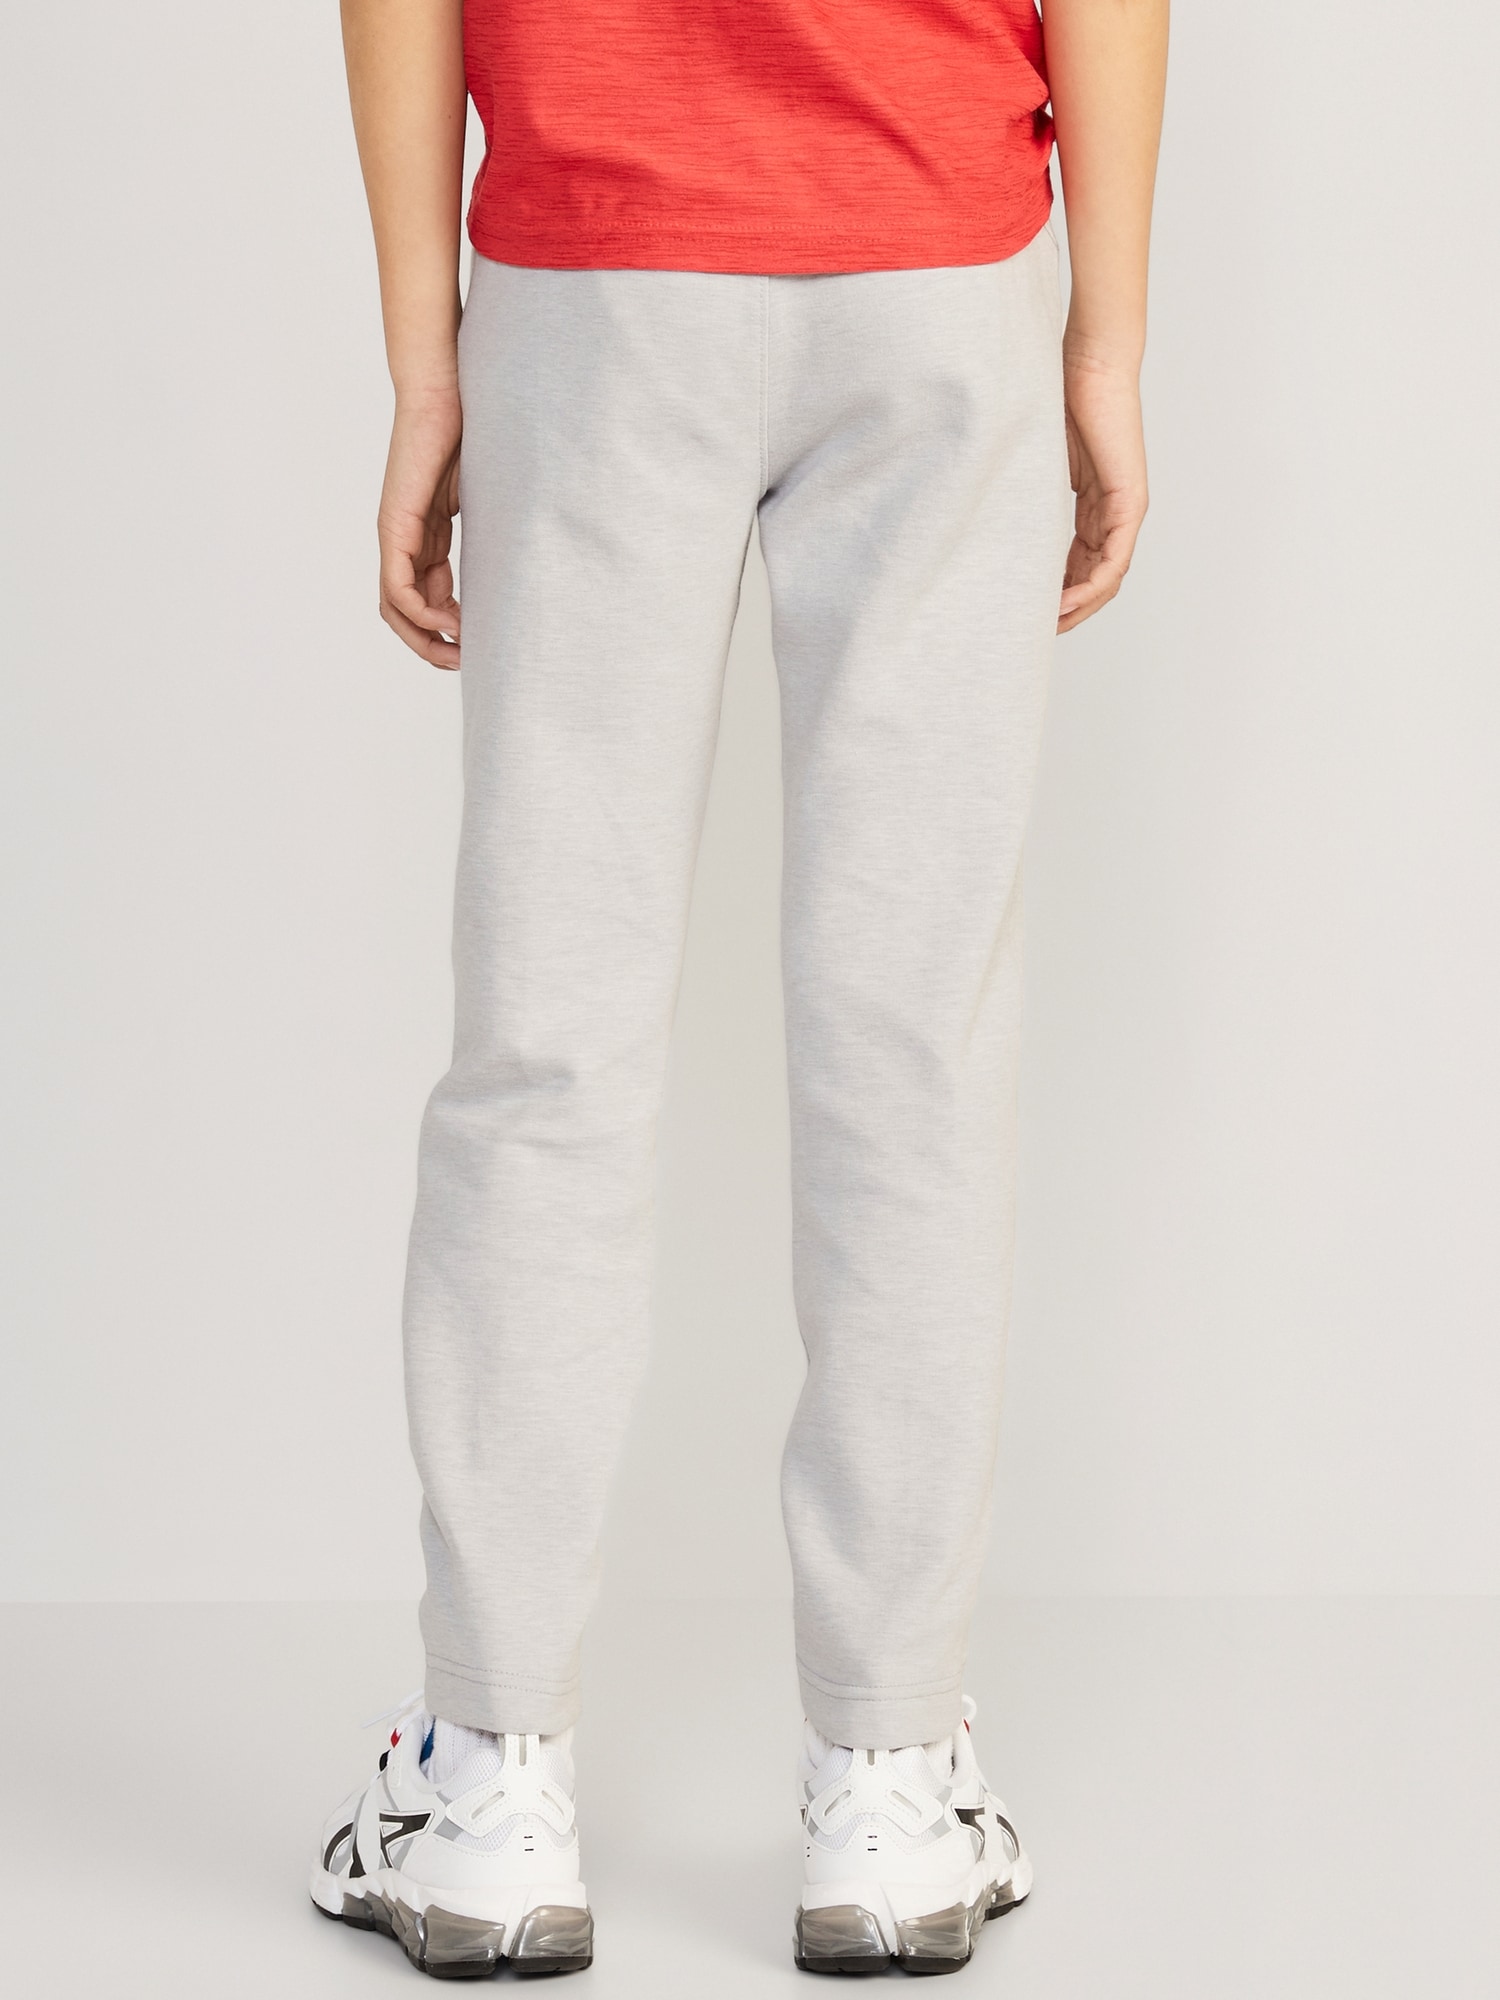 Dynamic Fleece Tapered Sweatpants for Boys | Old Navy